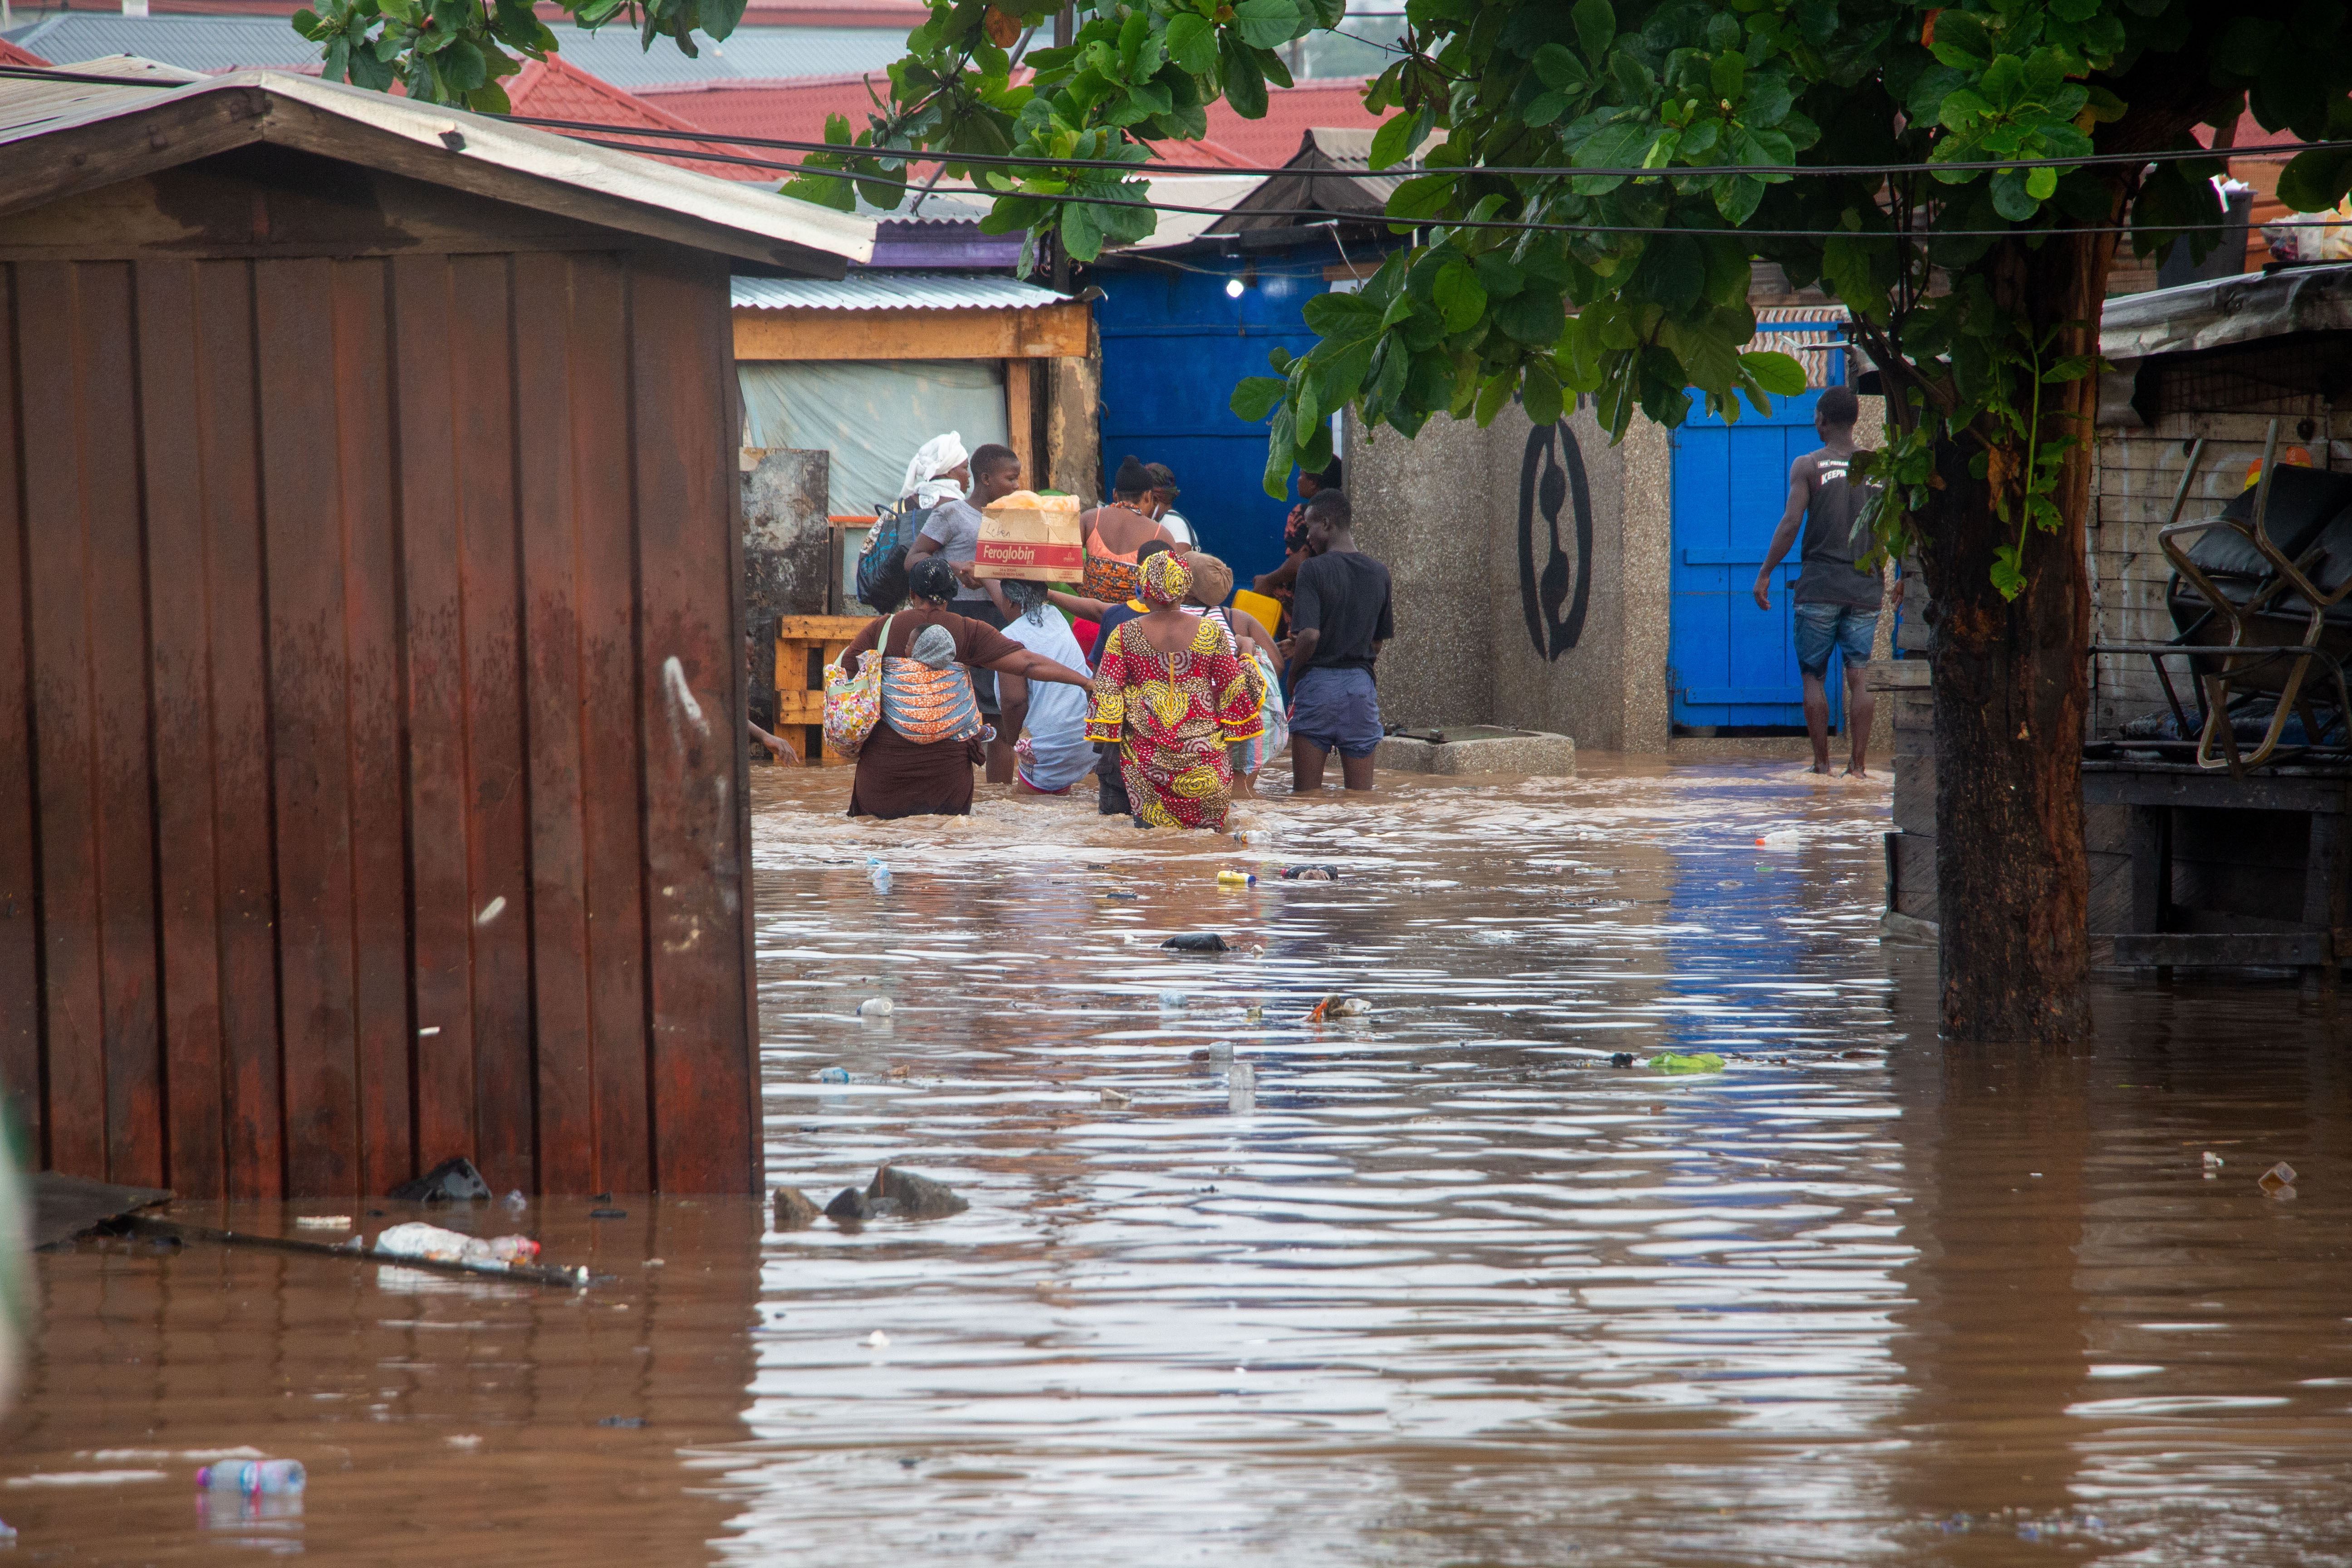 Persons struggling with floods